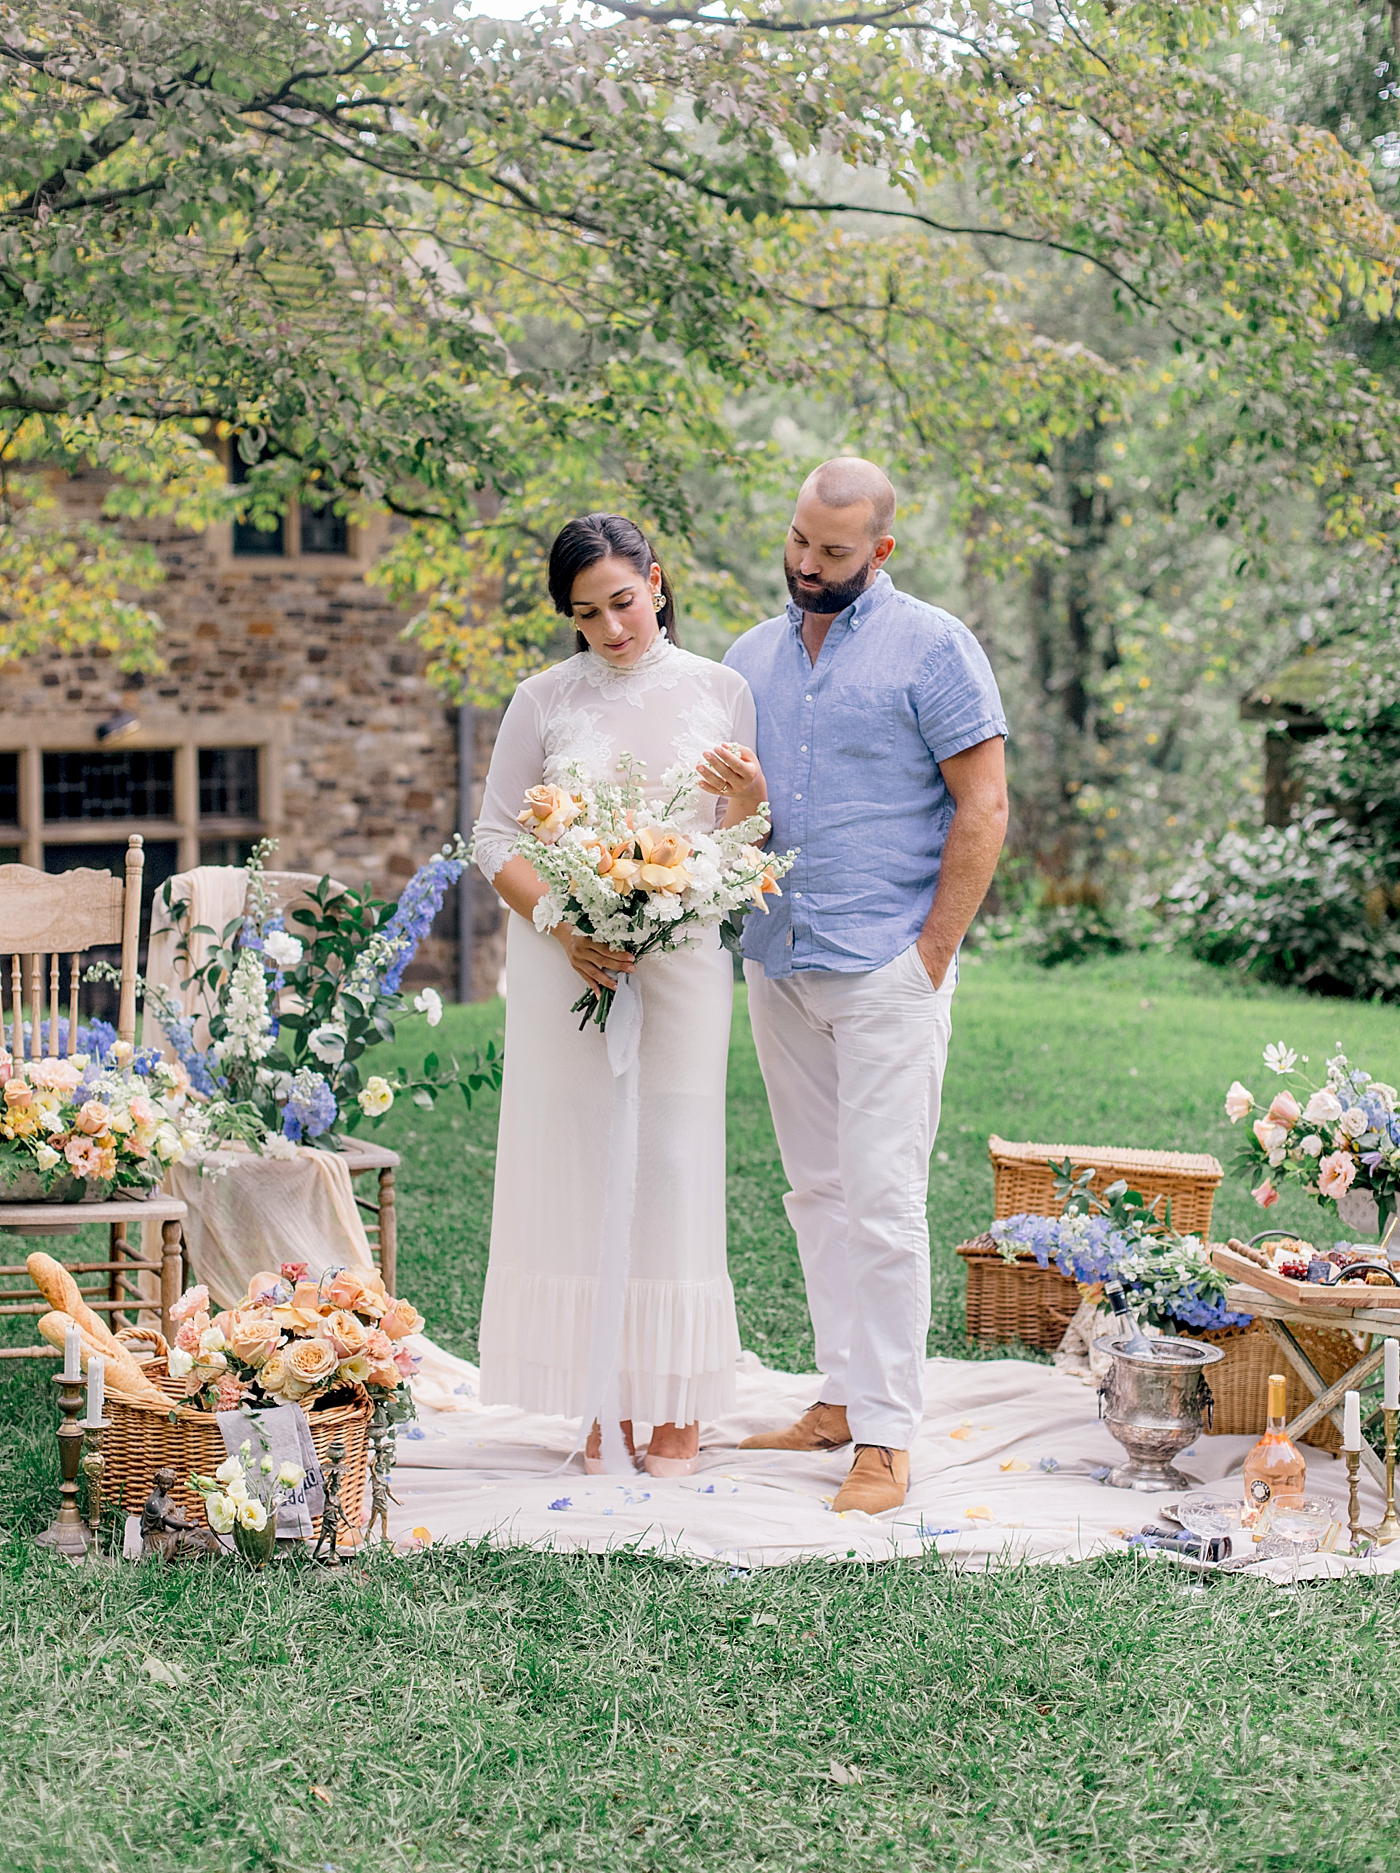 Bride and groom having a picnic together | Image by Hope Helmuth Photography